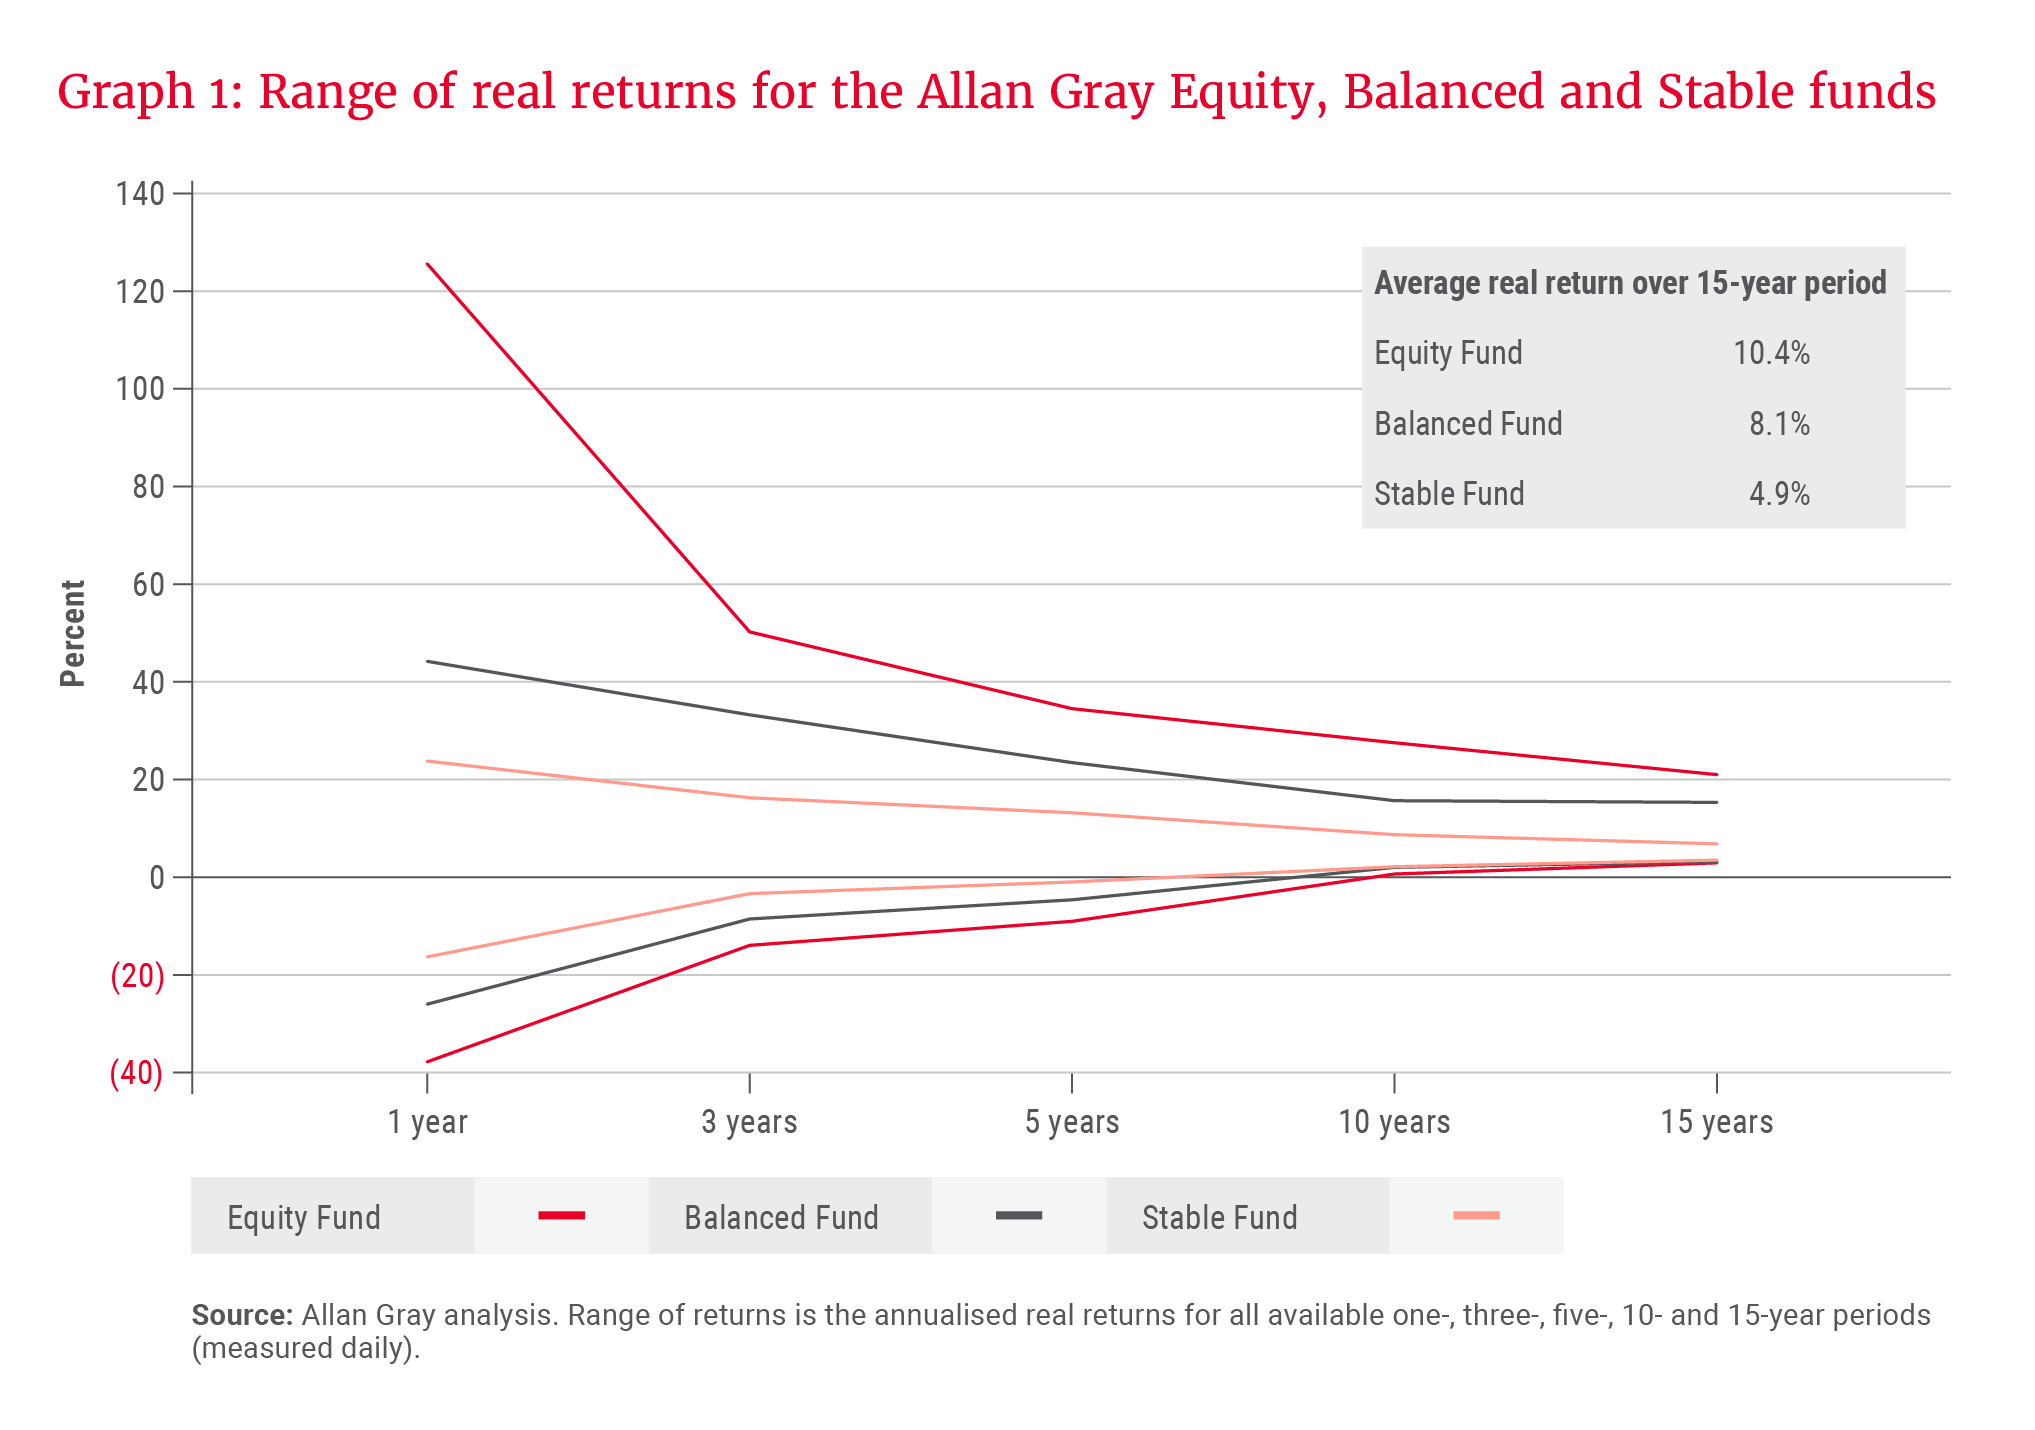 Range of real returns for the Allan Gray Equity, Balanced and Stable funds